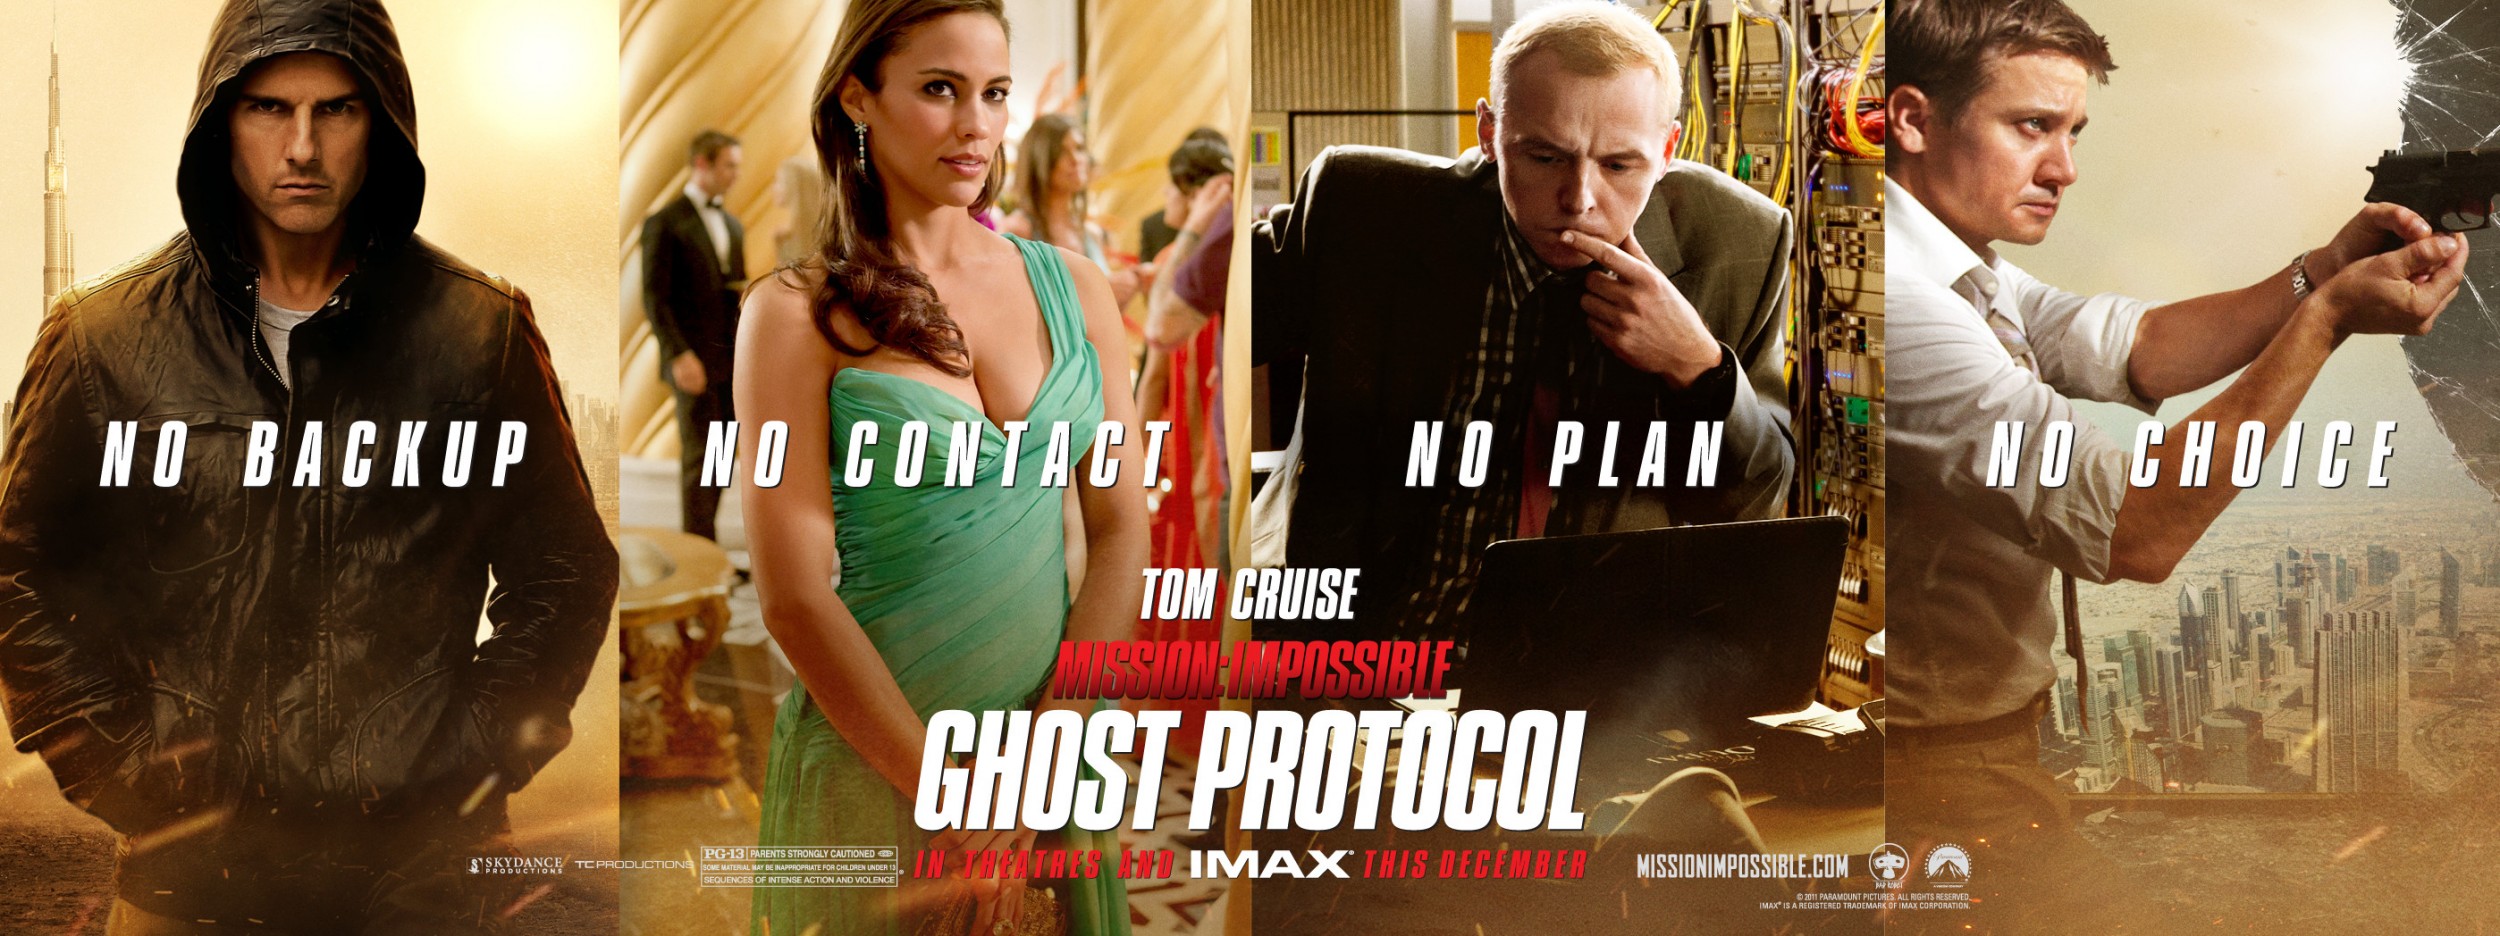 Mega Sized Movie Poster Image for Mission: Impossible - Ghost Protocol (#5 of 14)